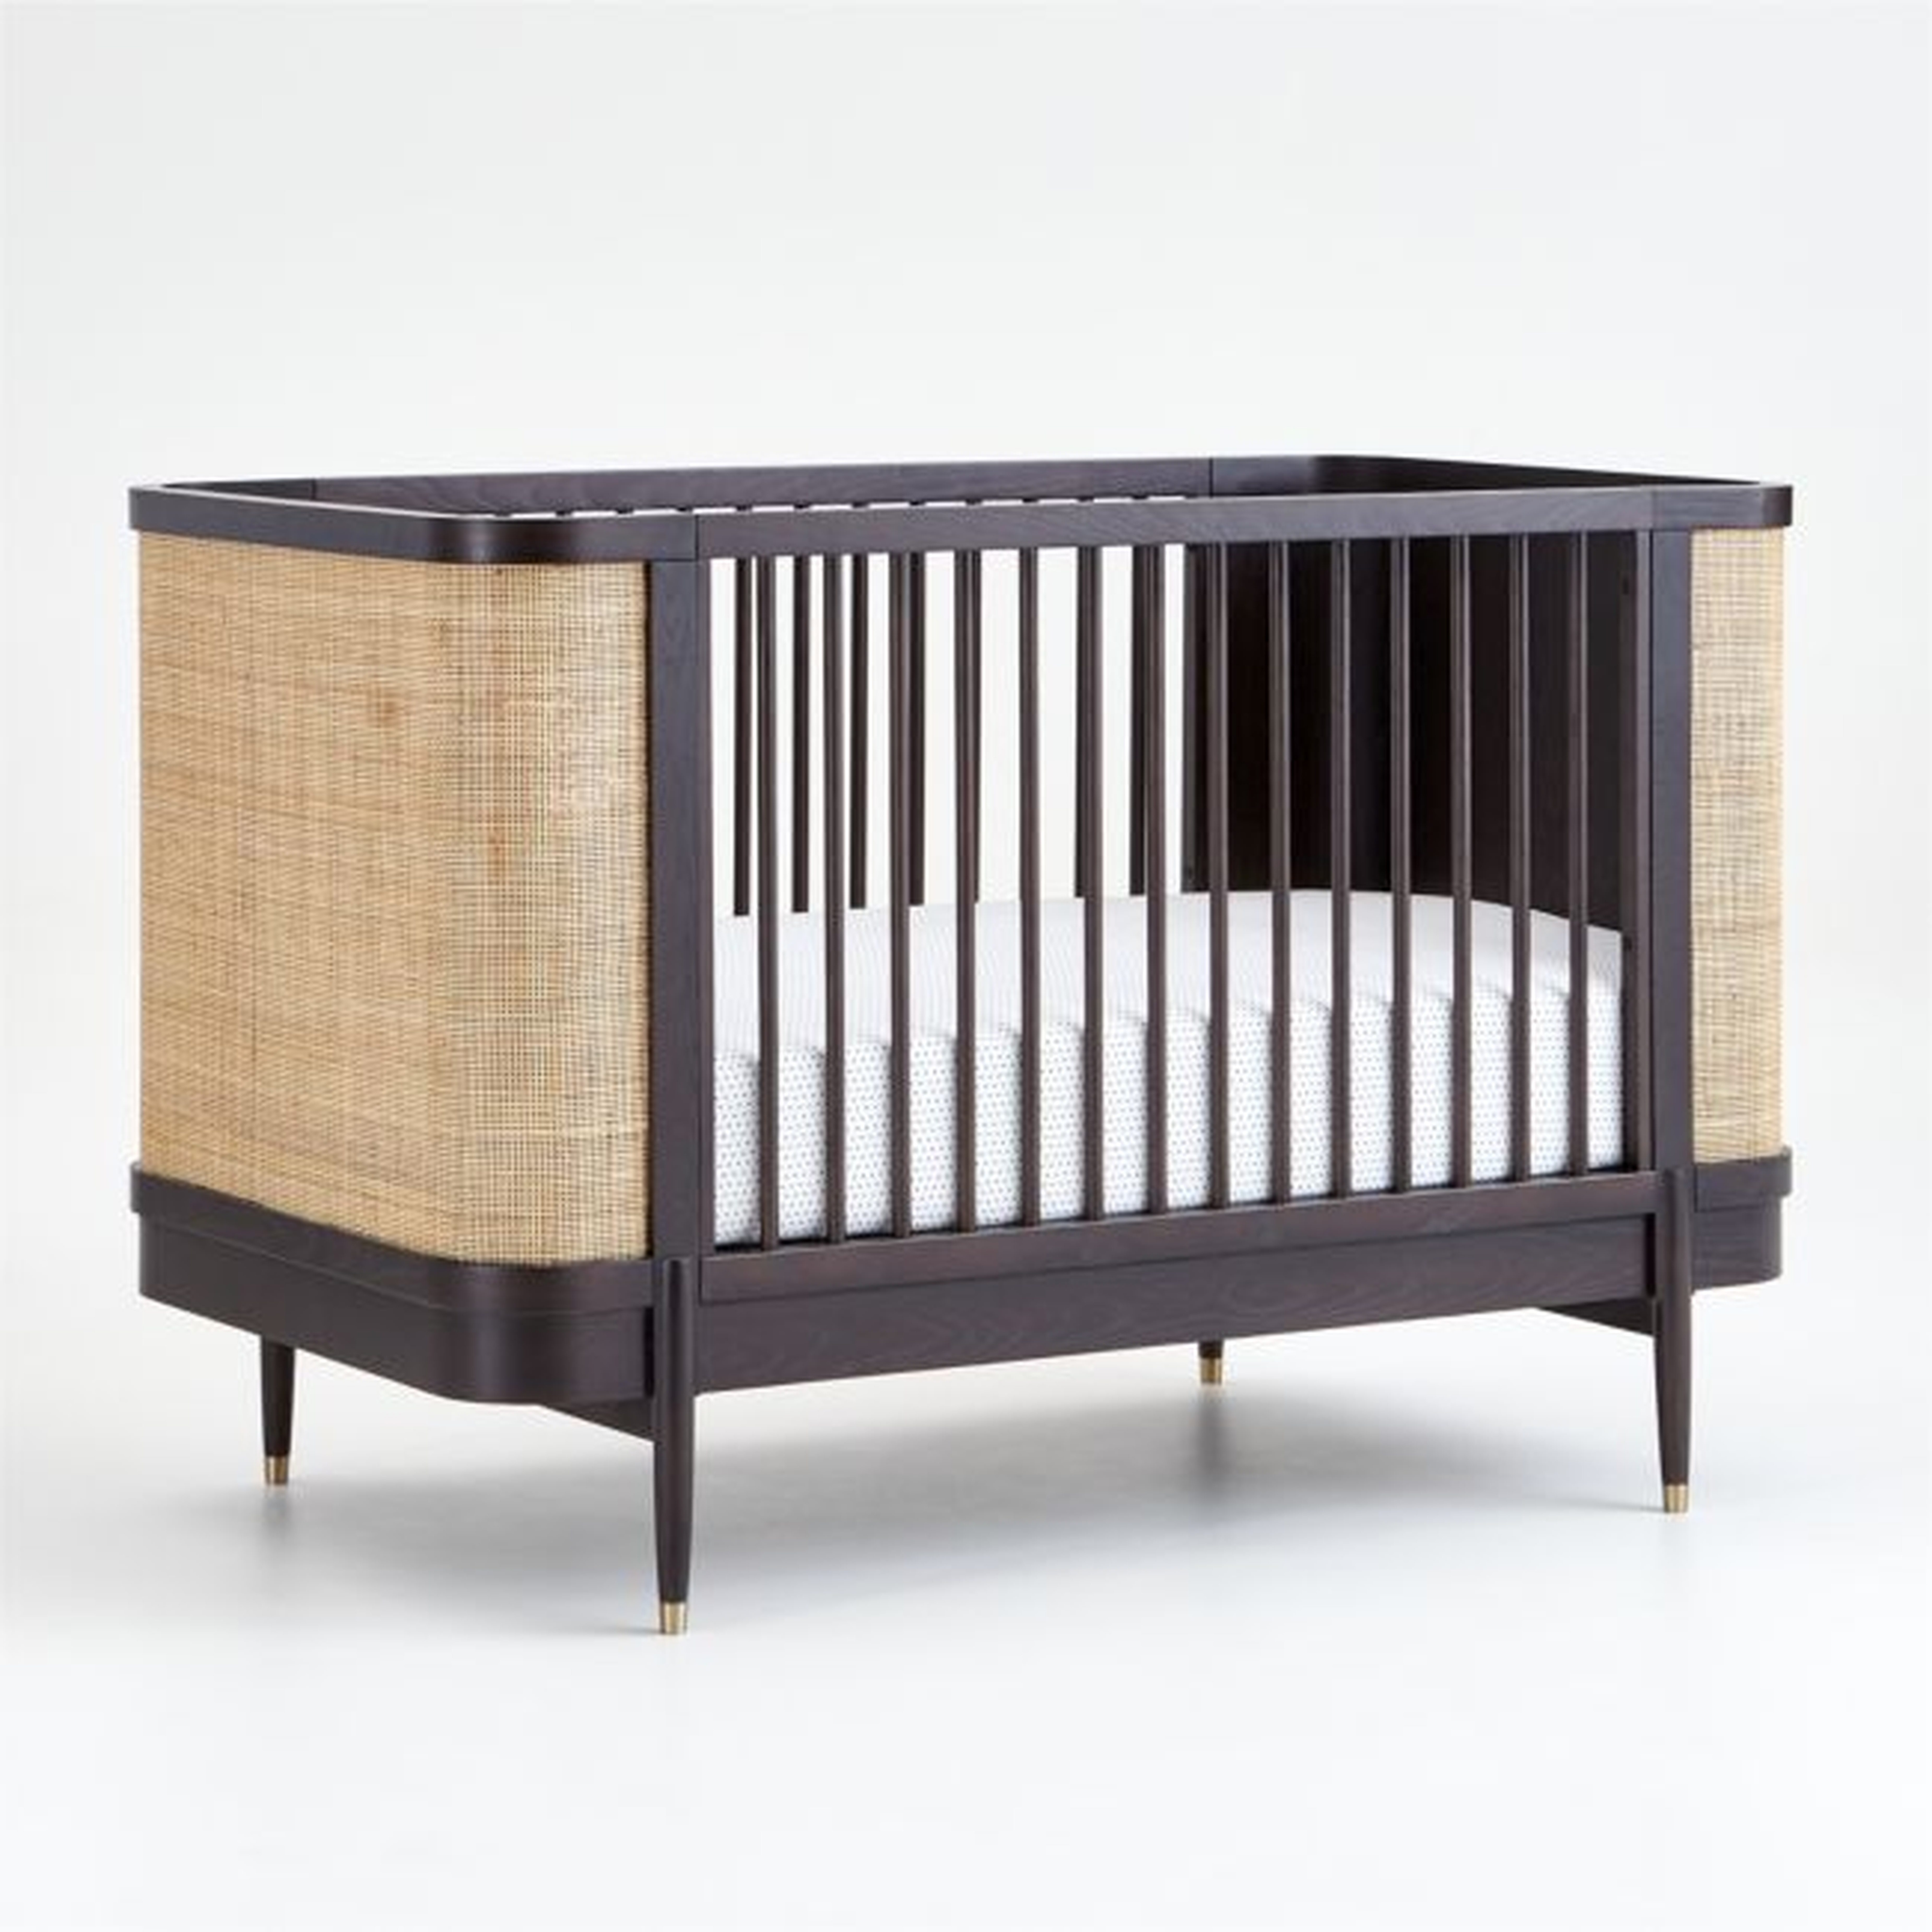 Black and Natural Cane Crib - Crate and Barrel